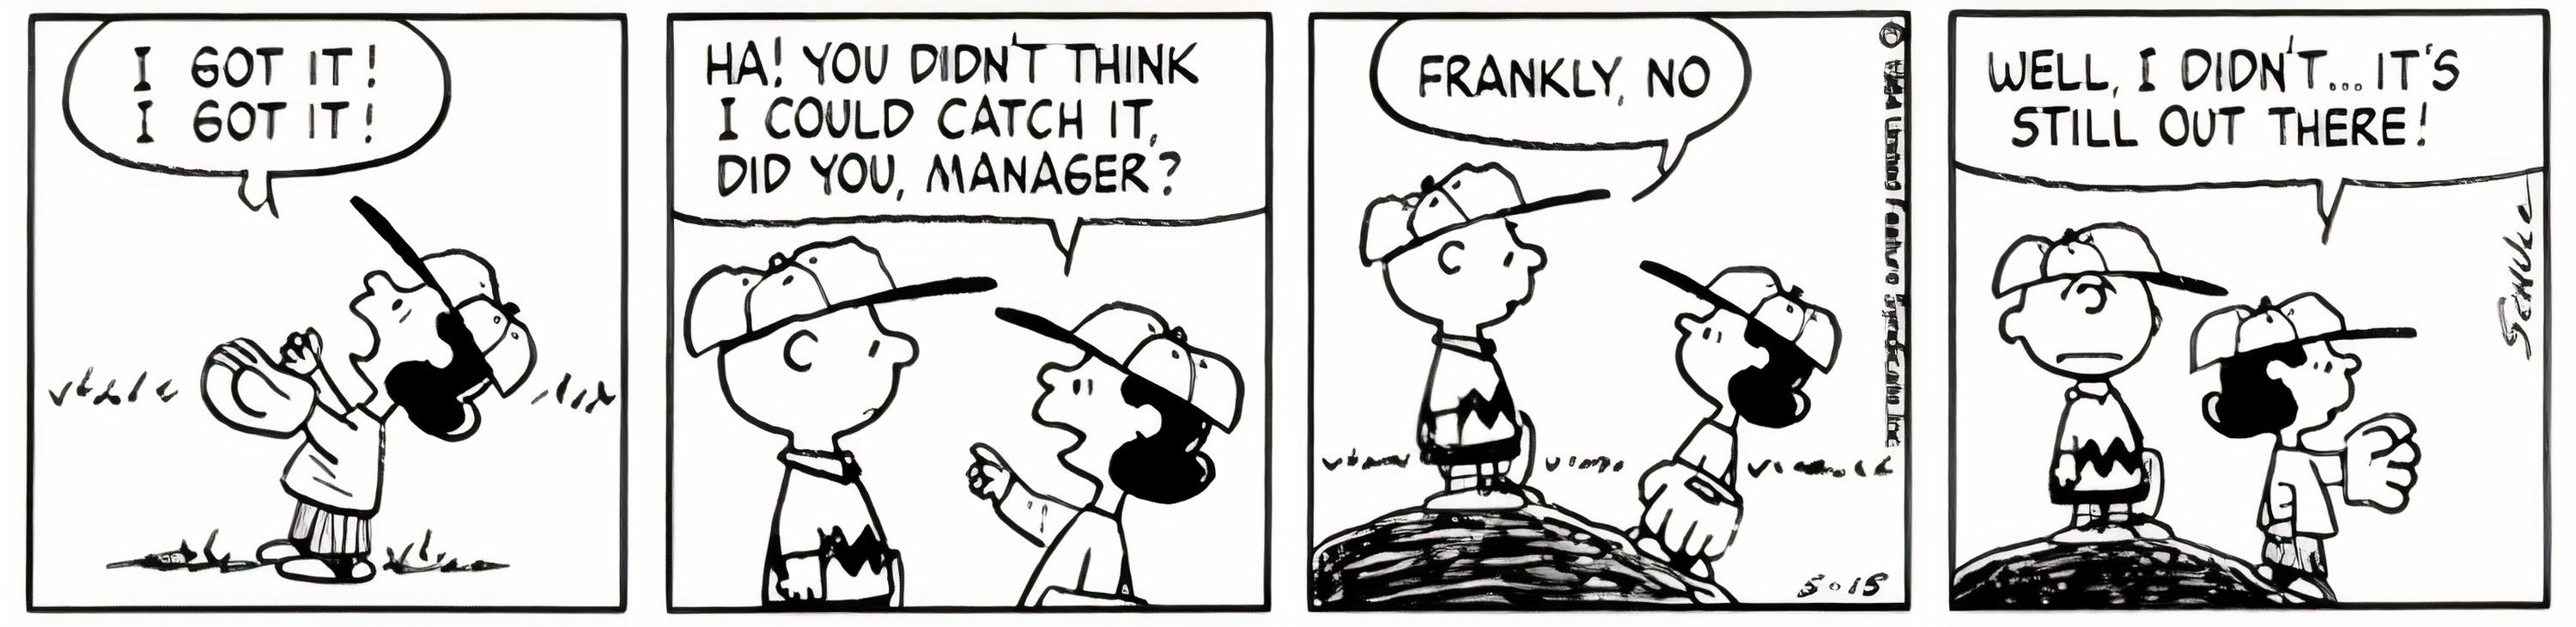 Peanuts, Lucy says the fly ball she didn't catch is still out there.